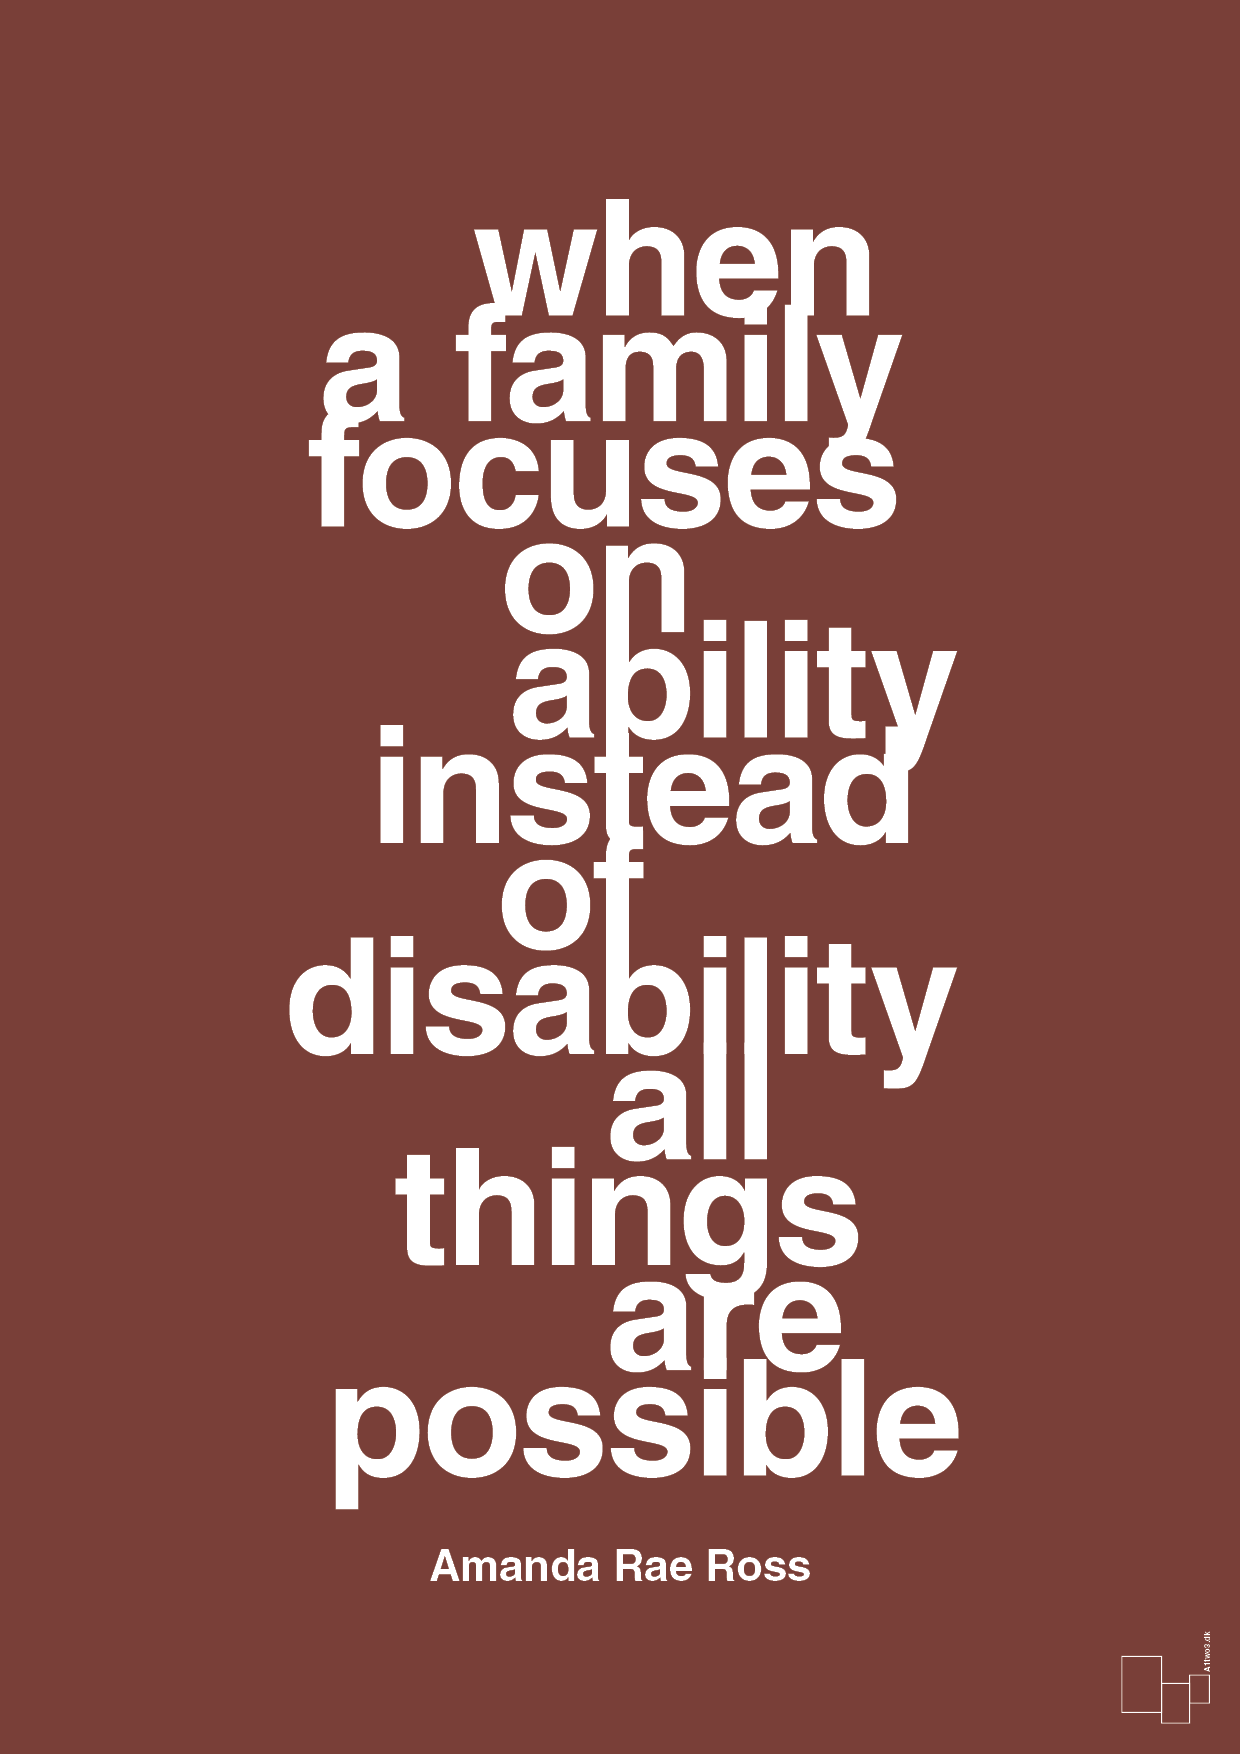 when a family focuses on ability instead of disability all things are possible - Plakat med Samfund i Red Pepper